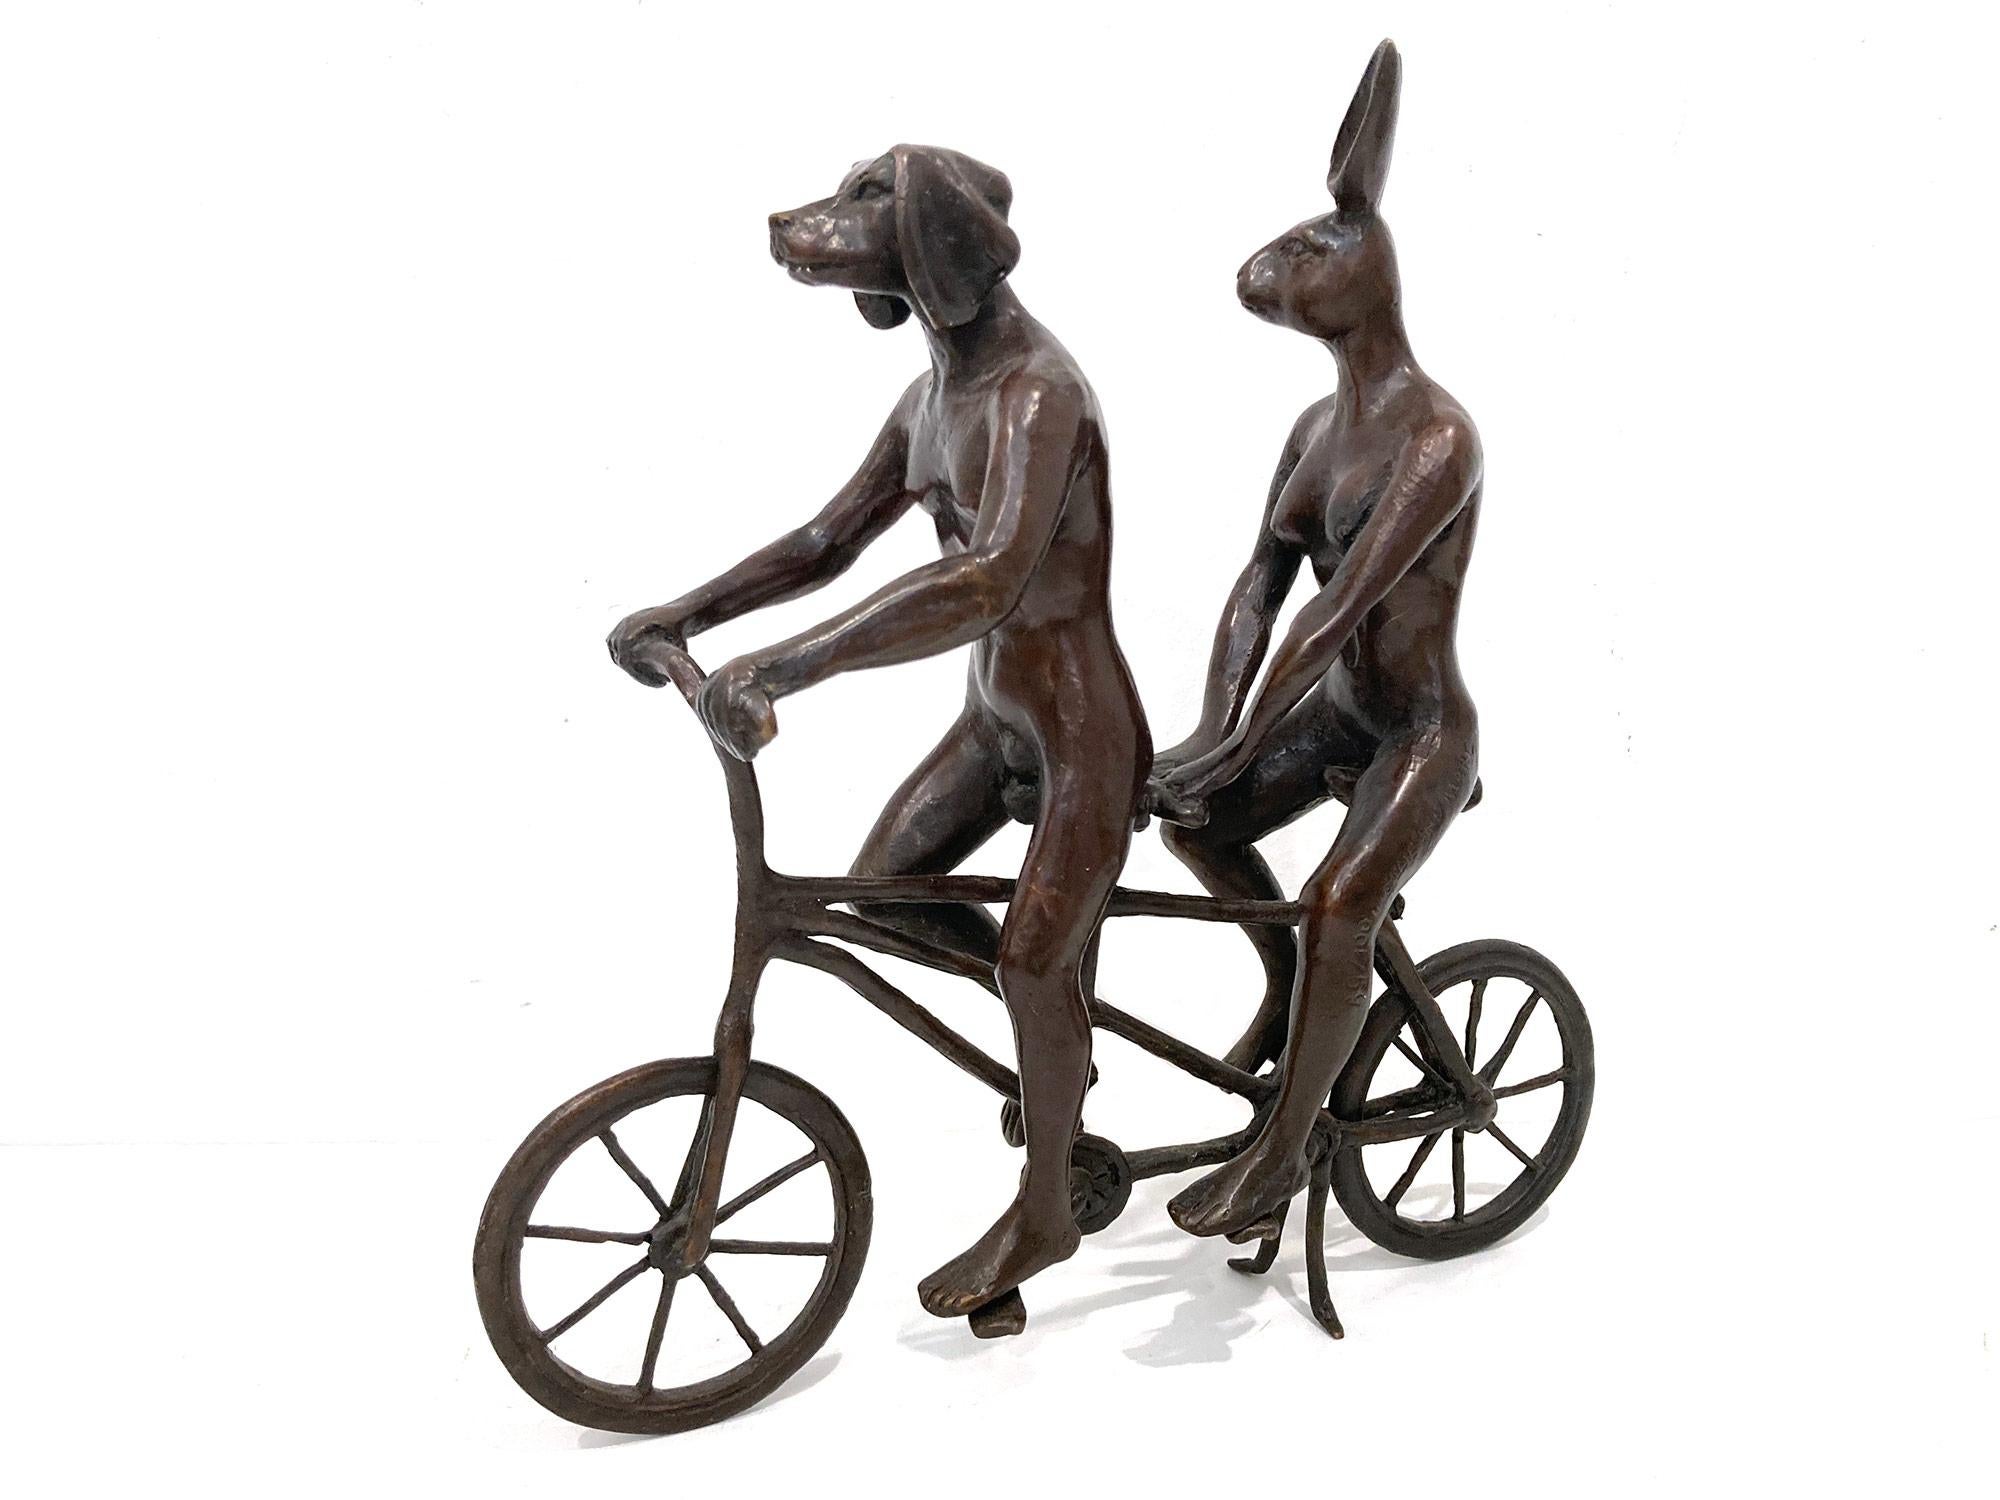 Gillie and Marc Schattner Figurative Sculpture - "They Loved Riding Together in Paris" Bicycle Sculpture with Deep Bronze Patina